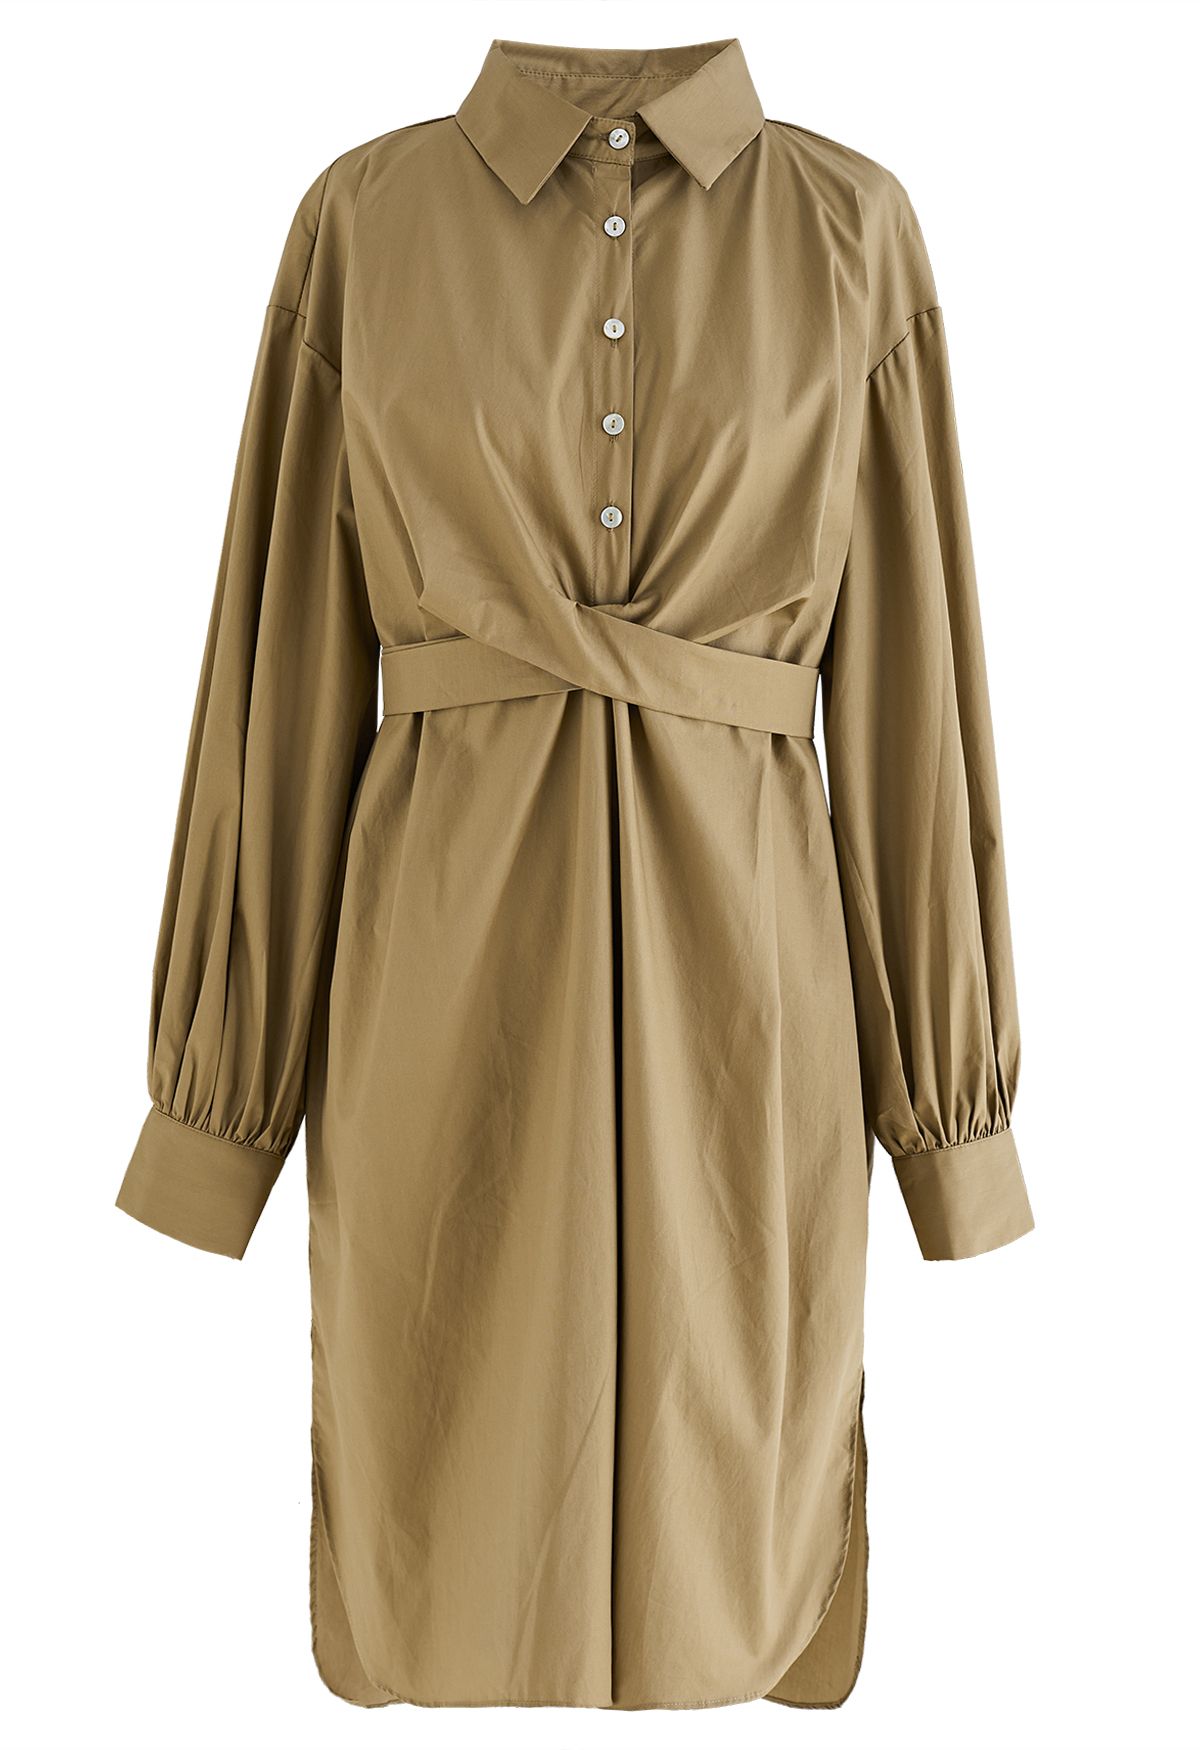 Twisted Waist Buttoned Shirt Dress in Khaki - Retro, Indie and Unique ...